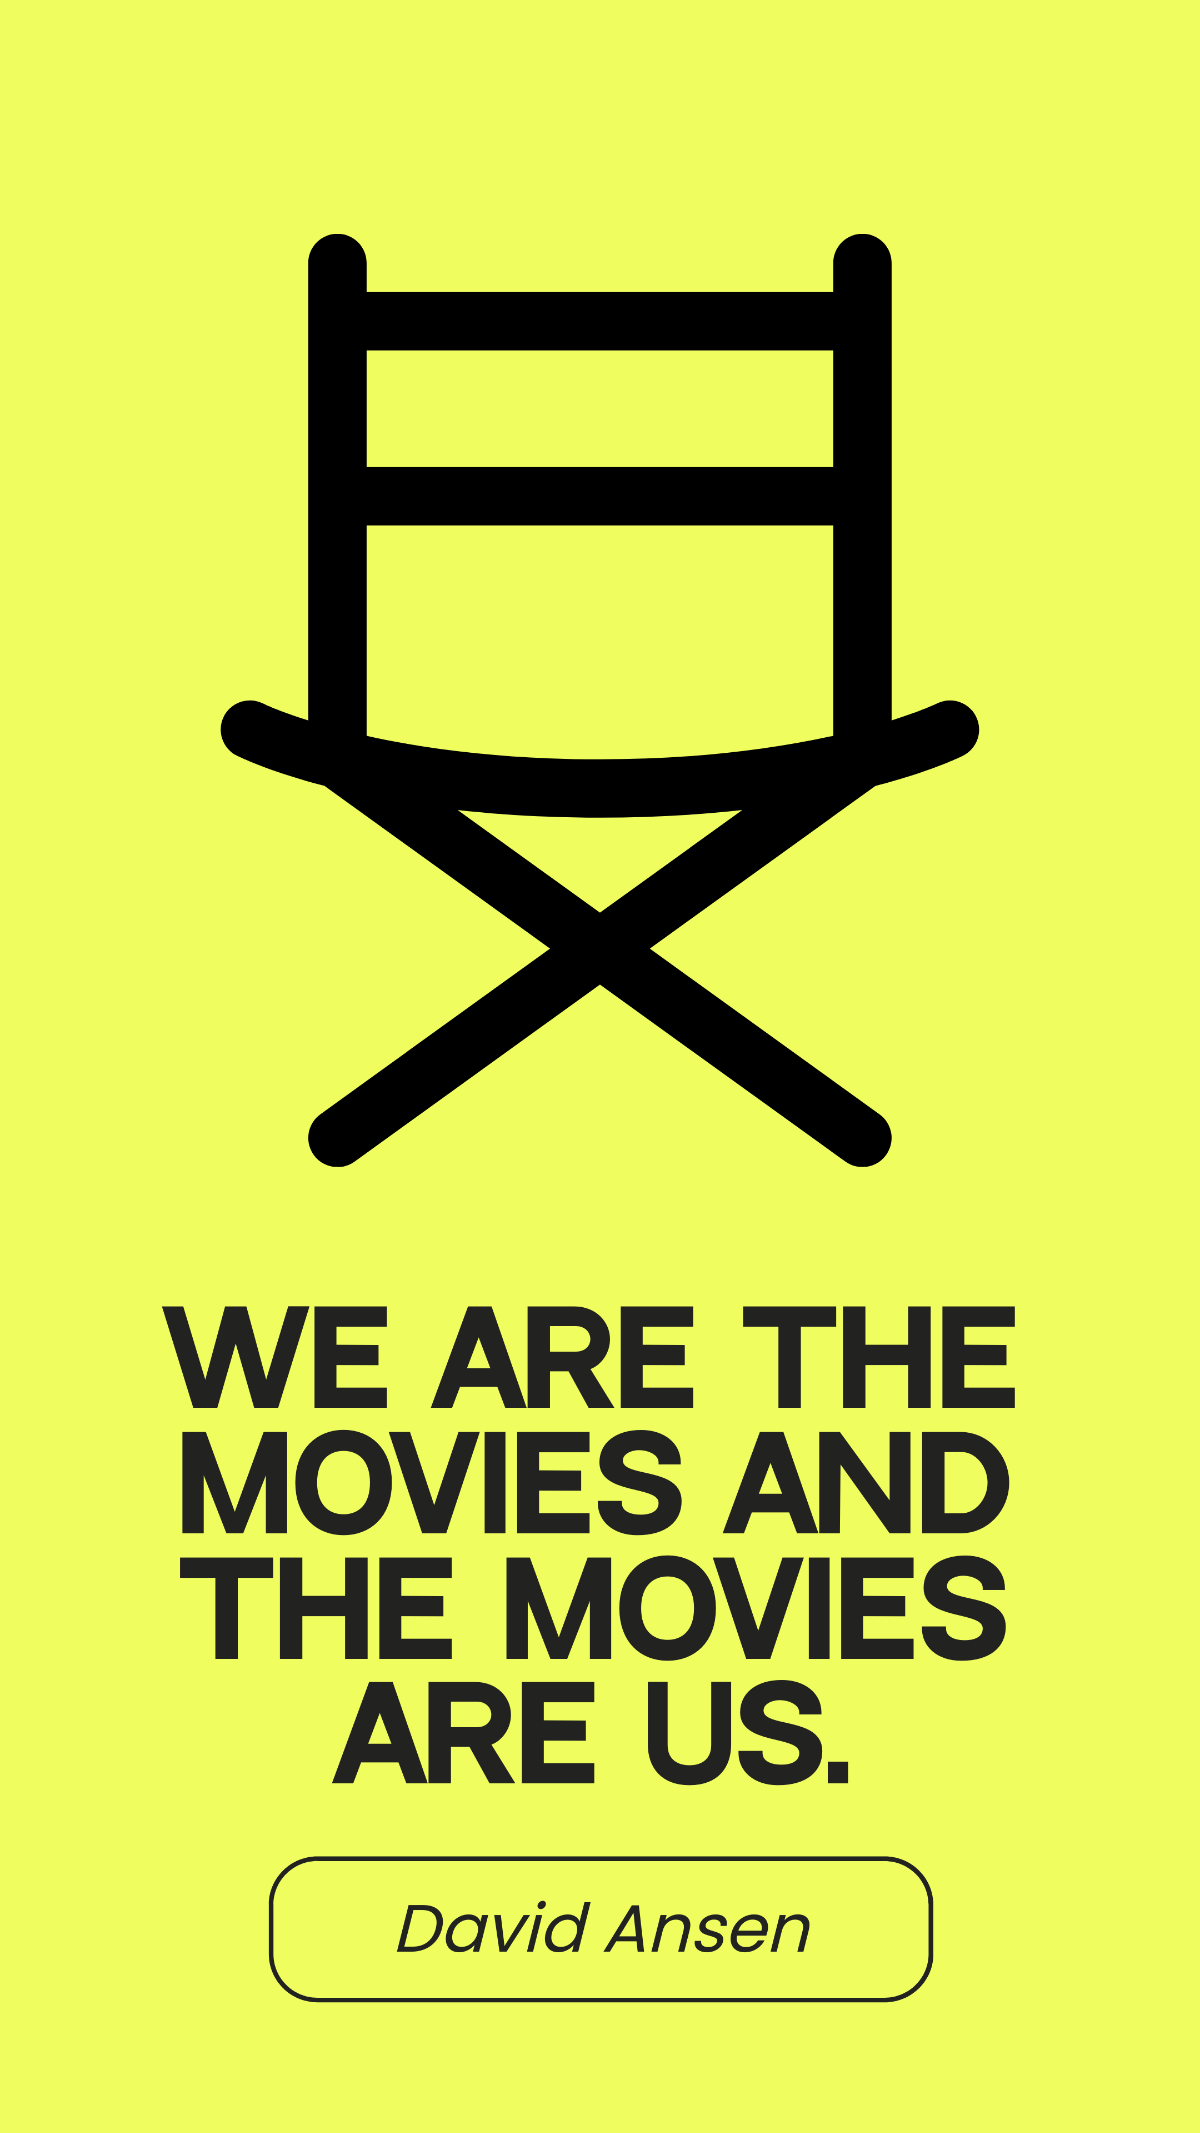 David Ansen - We are the movies and the movies are us.